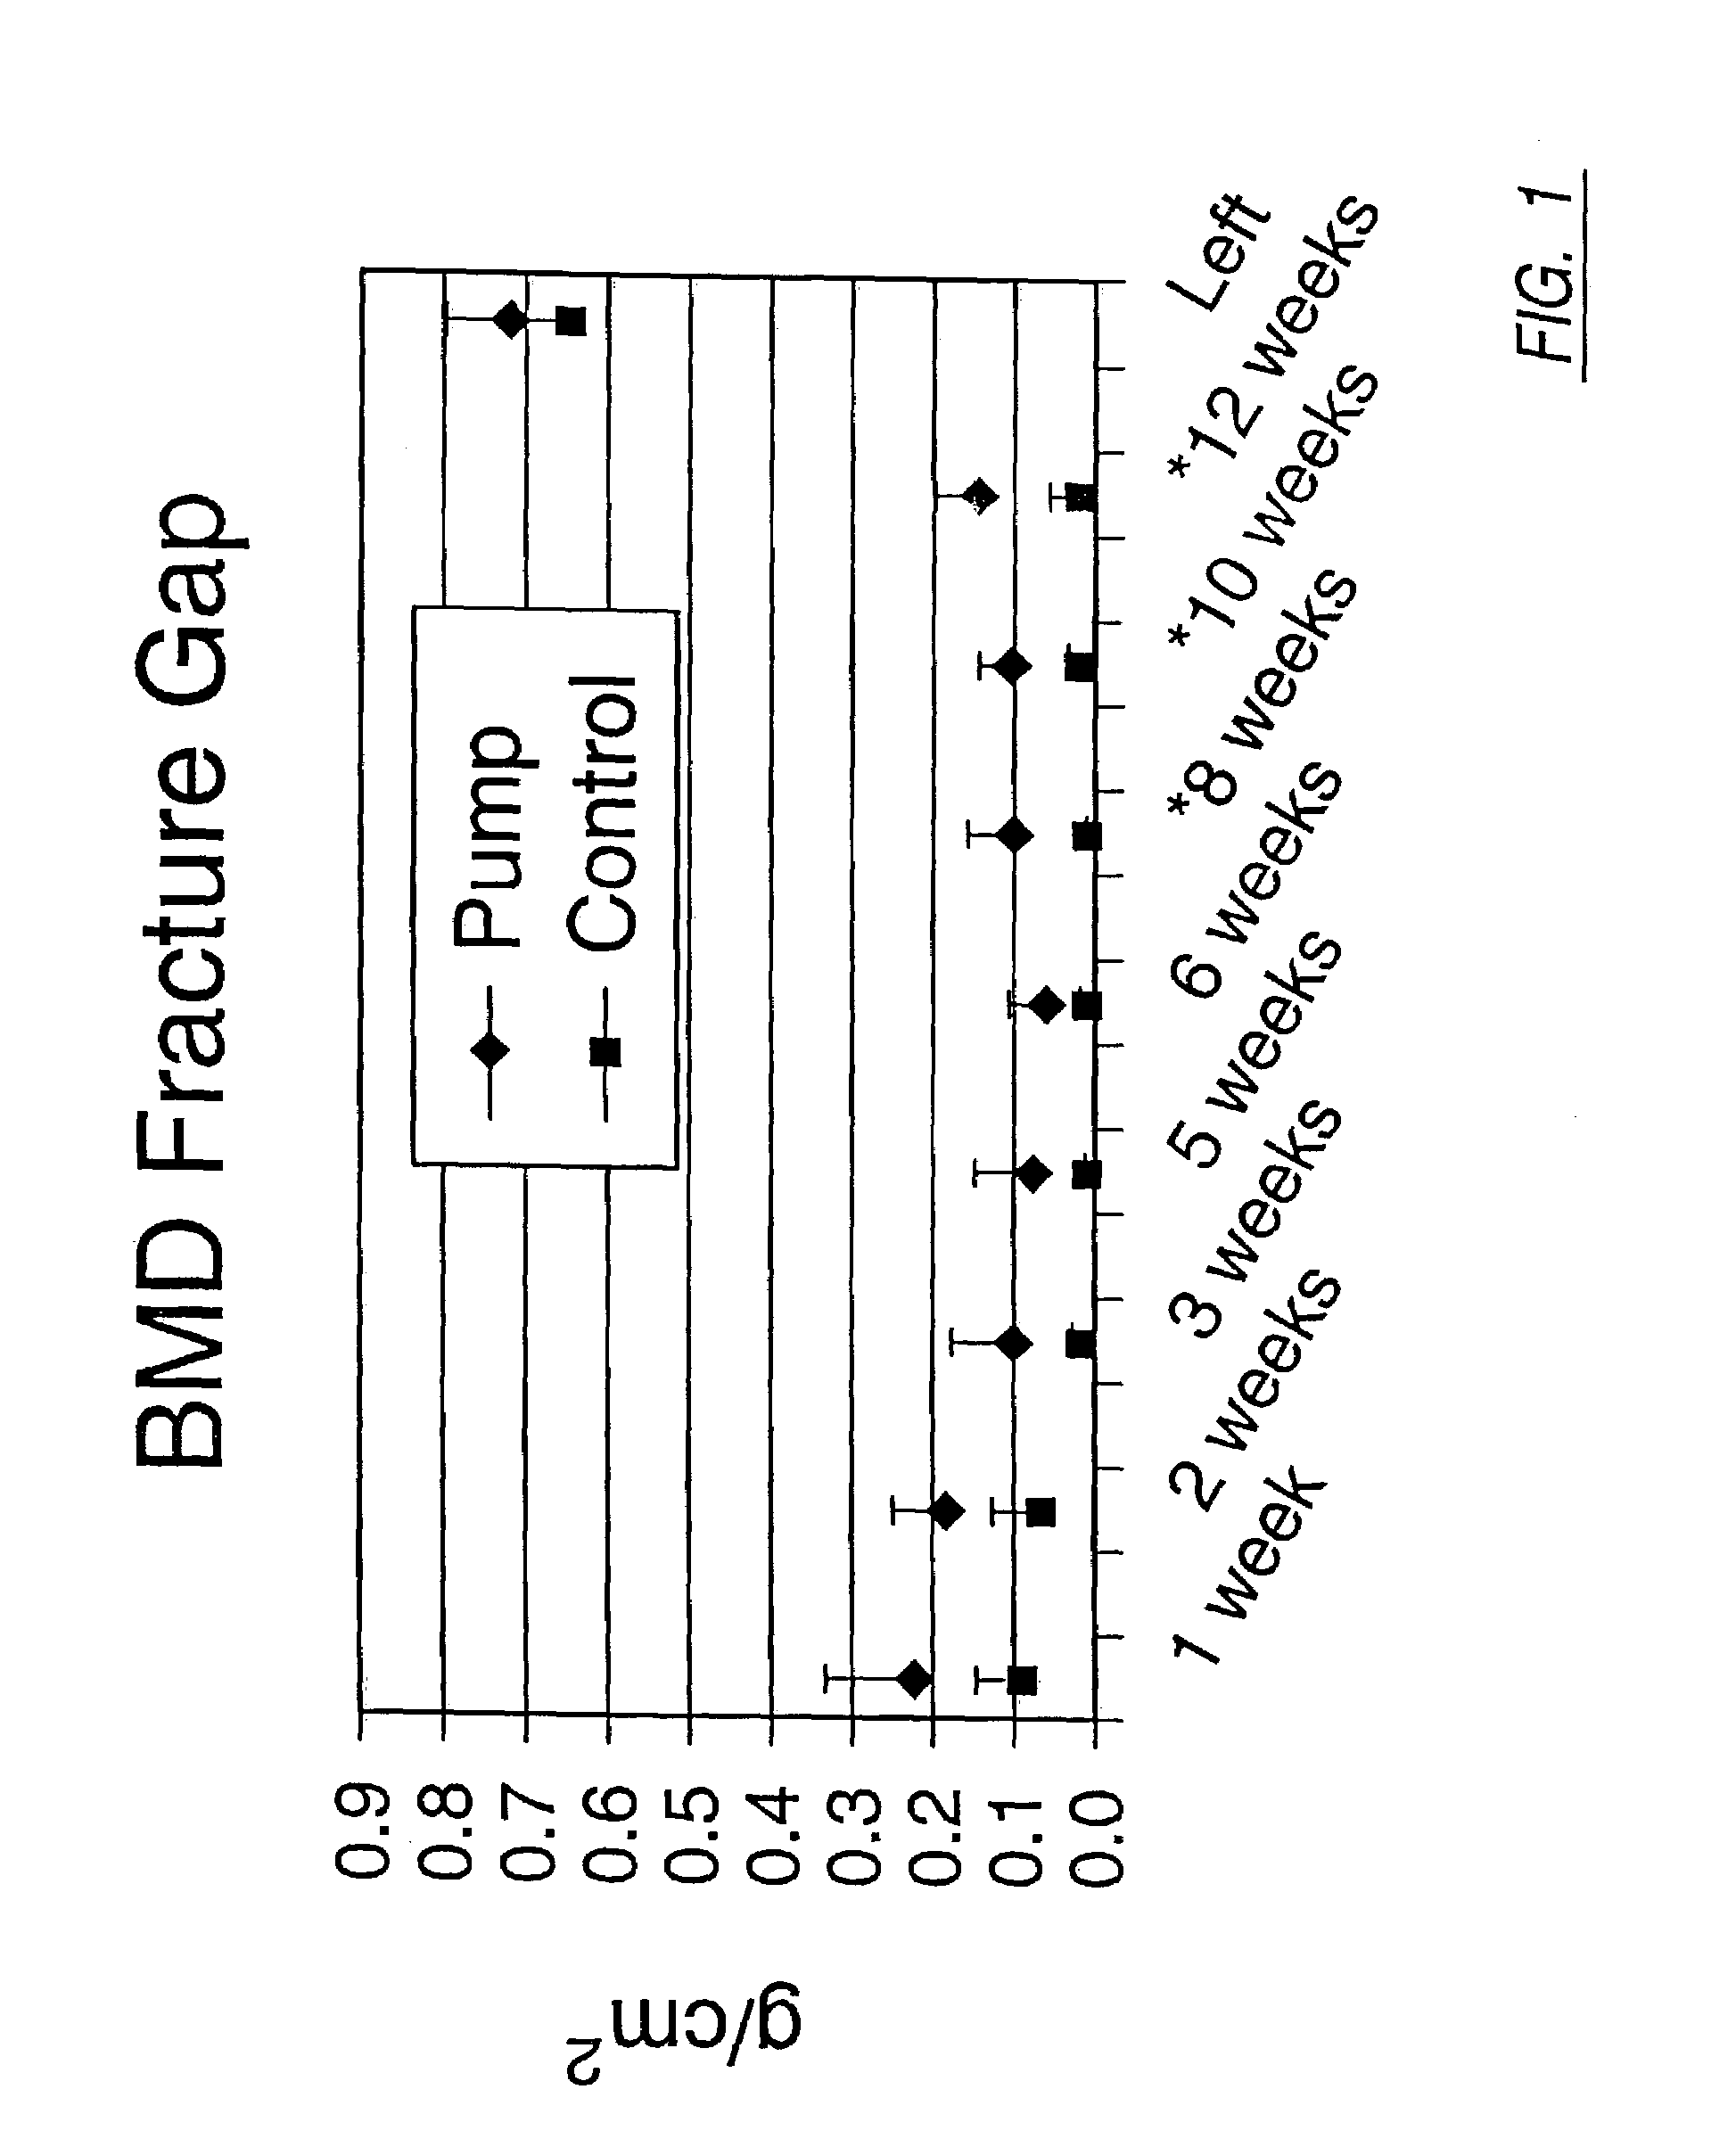 Method and apparatus for facilitating the healing of bone fractures